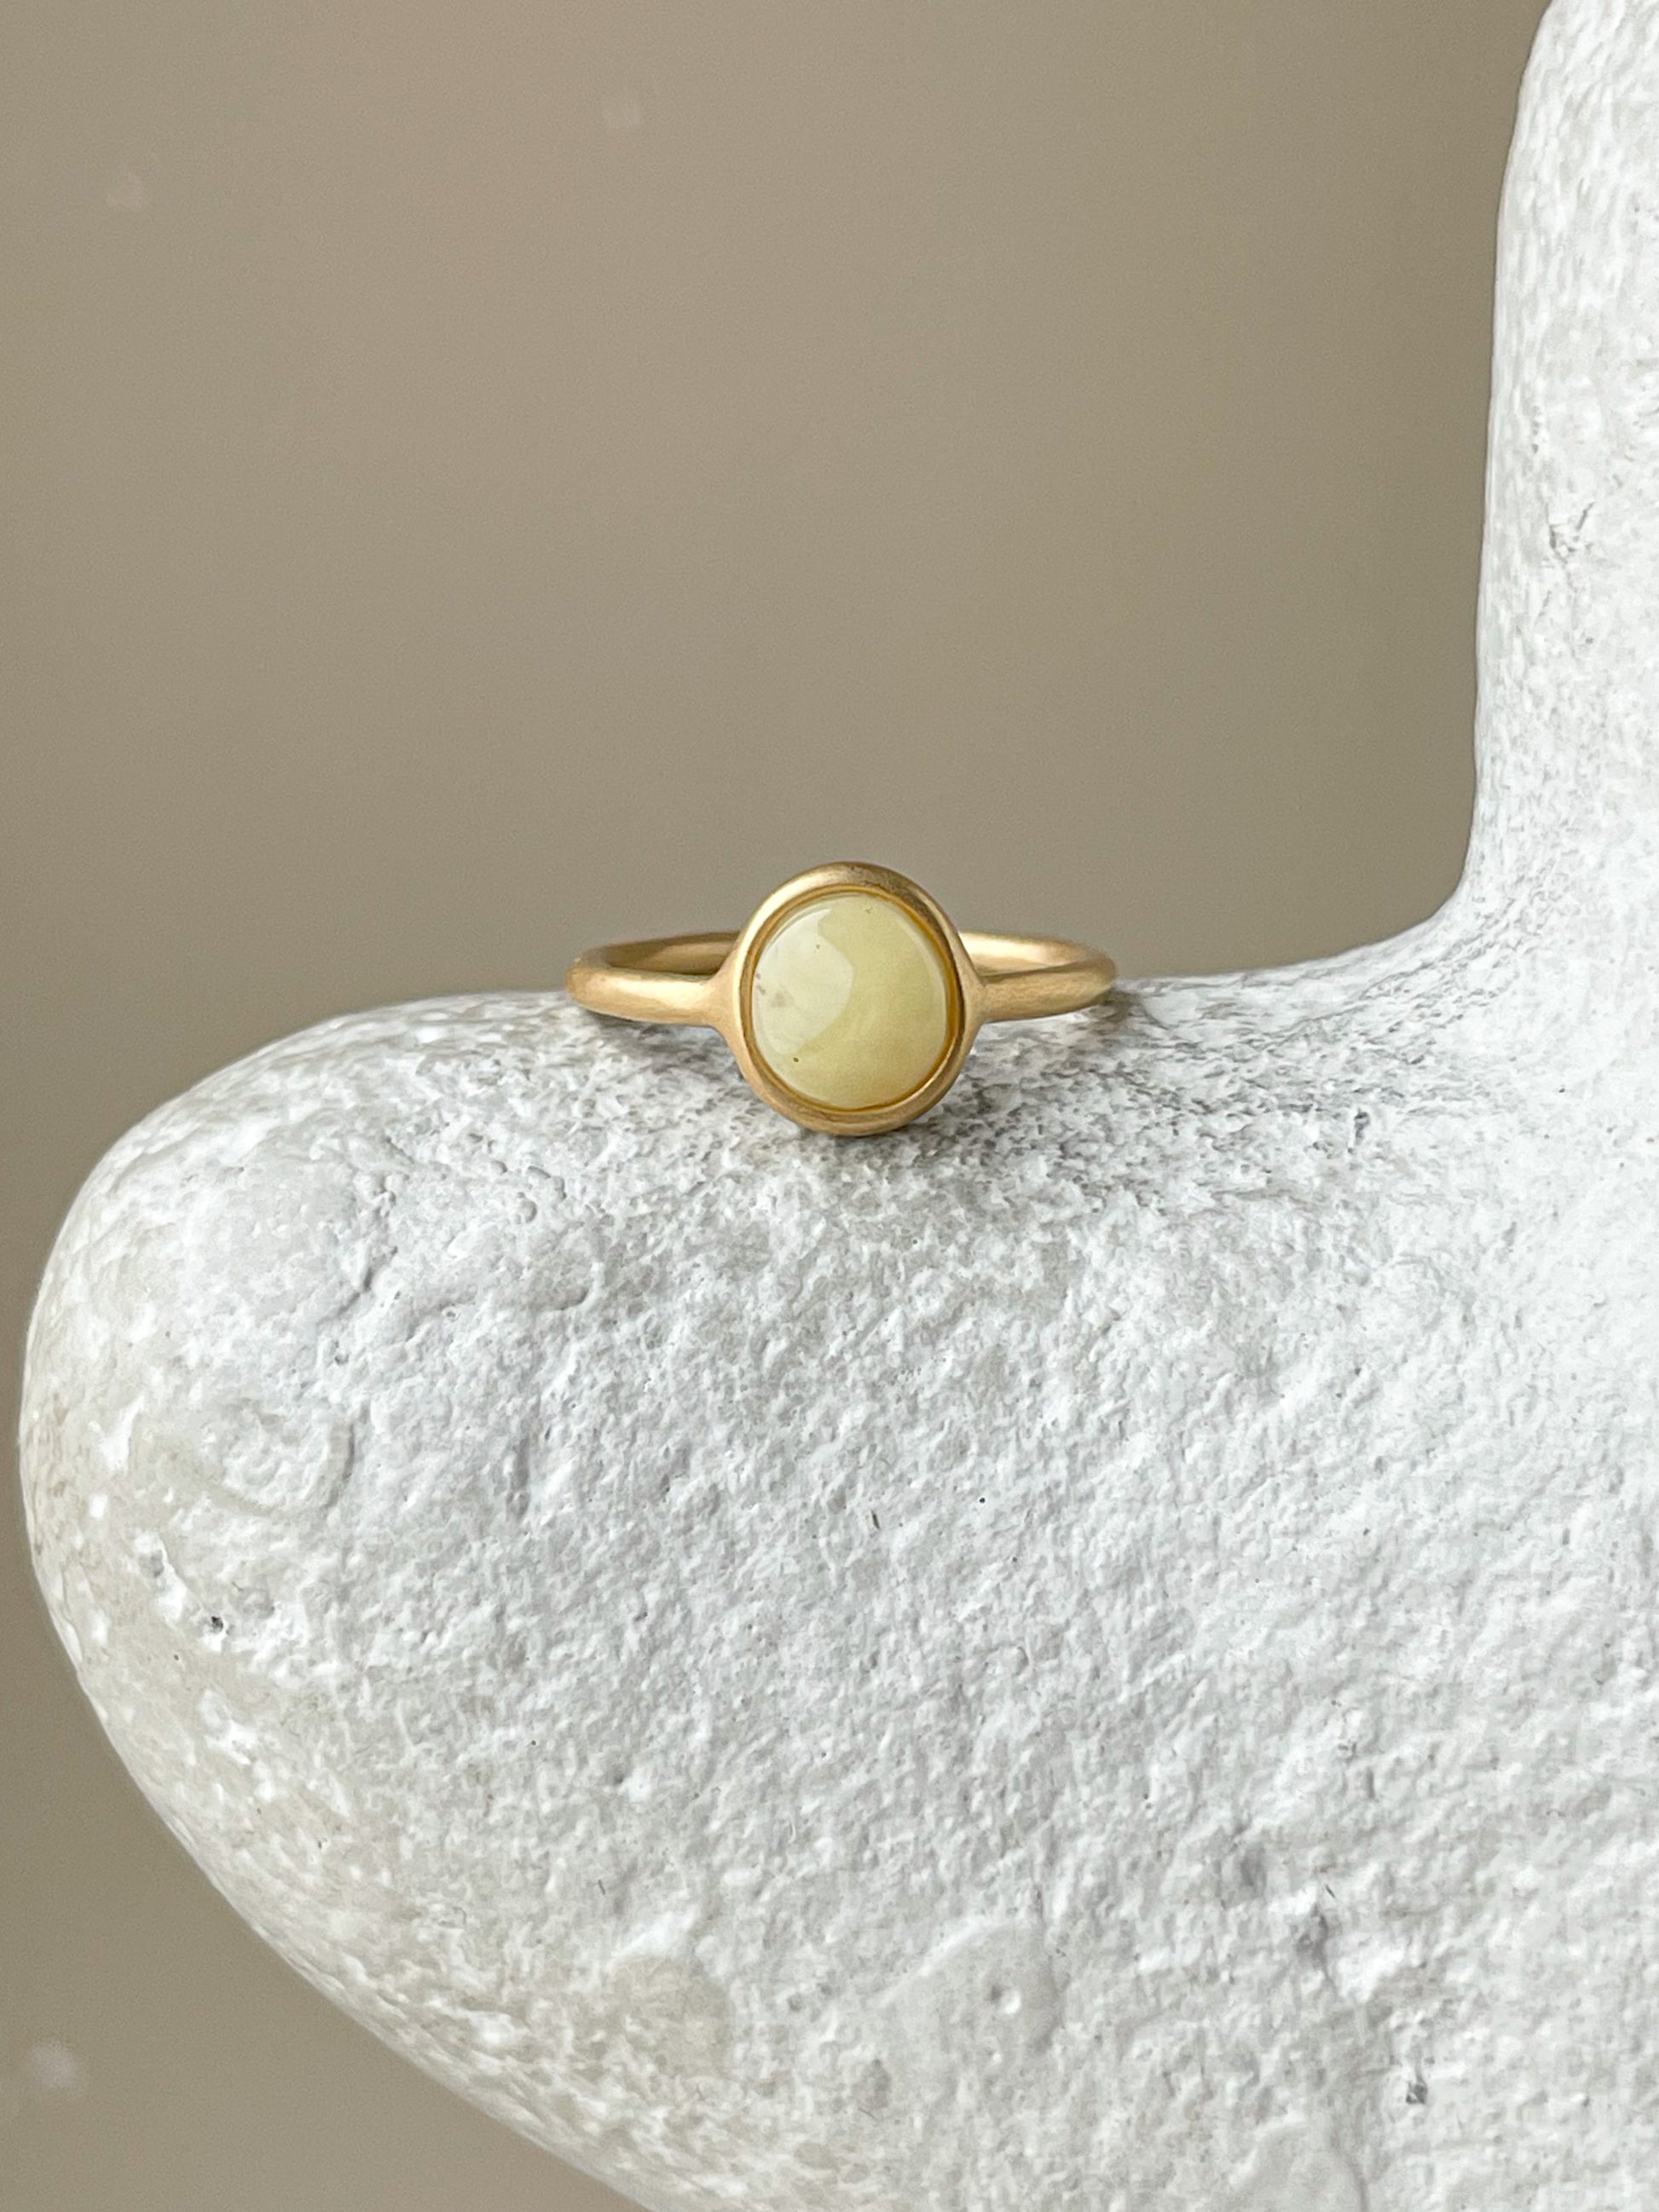 Mate amber ring - Gold plated silver - Statement ring collection 